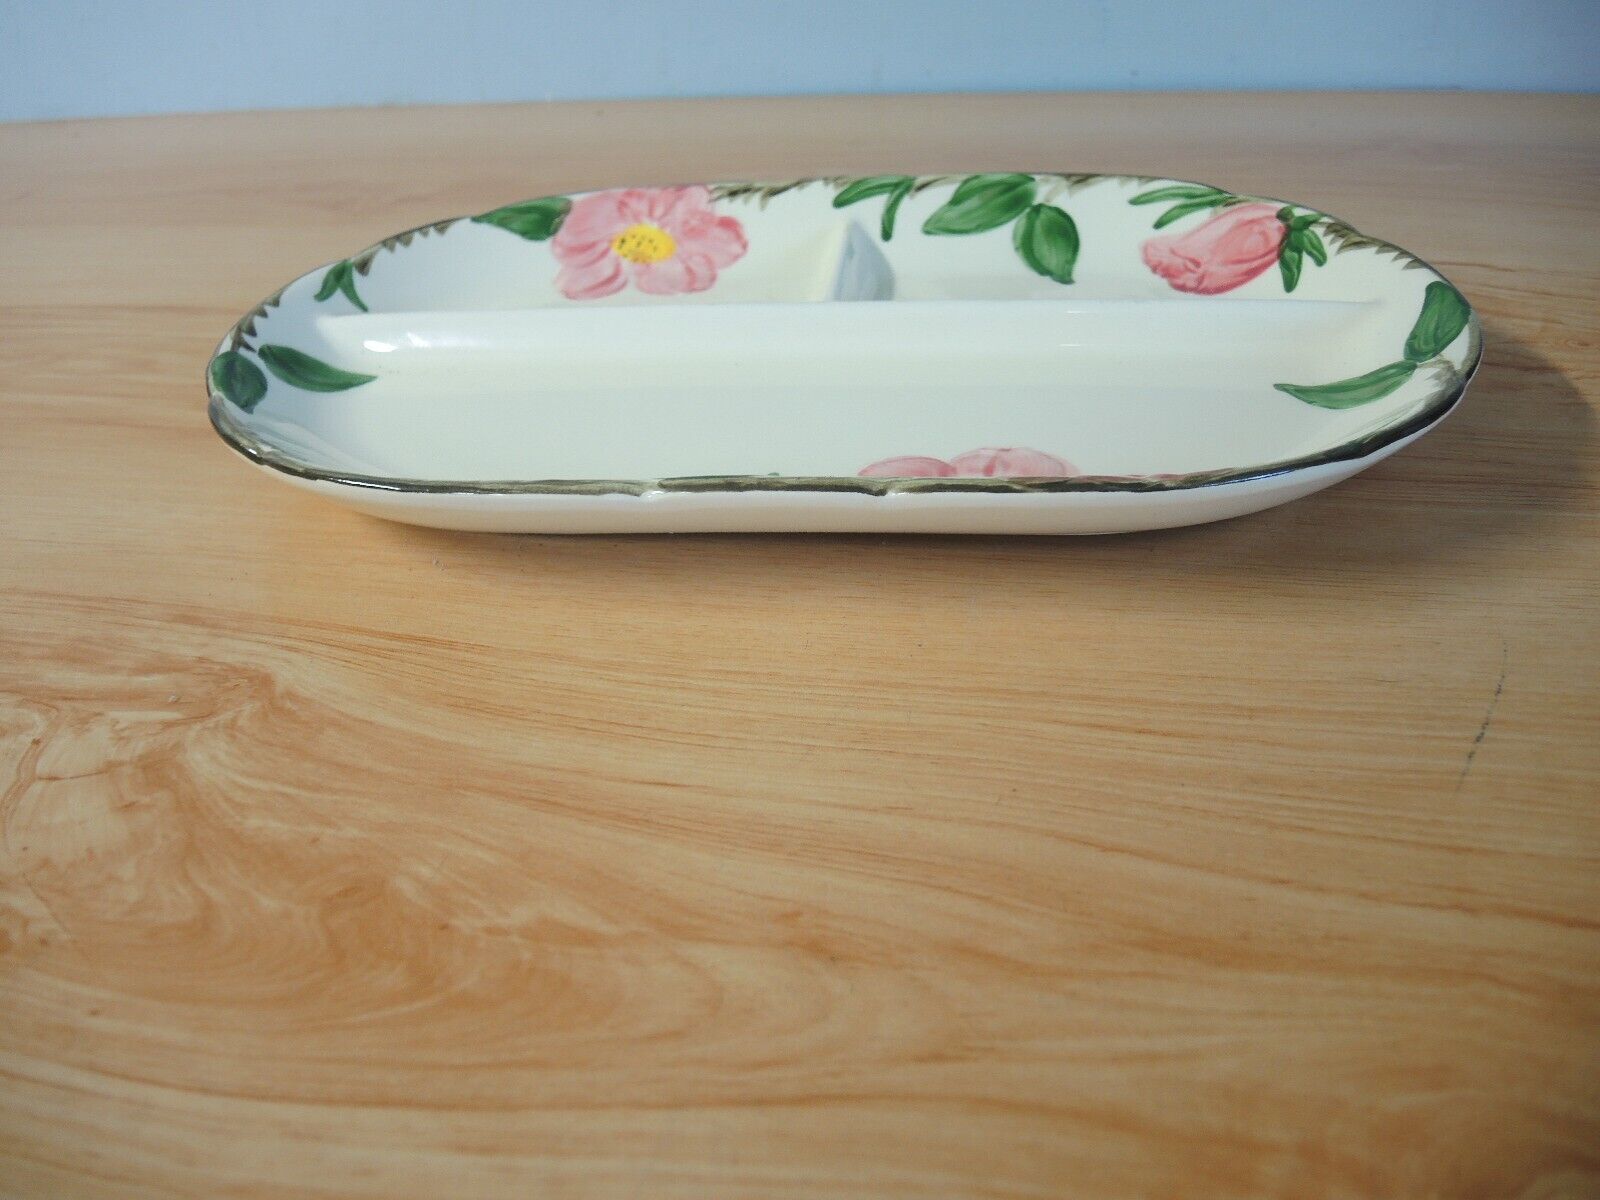 VINTAGE FRANCISCAN DESERT ROSE SECTIONED RELISH TRAY - USA